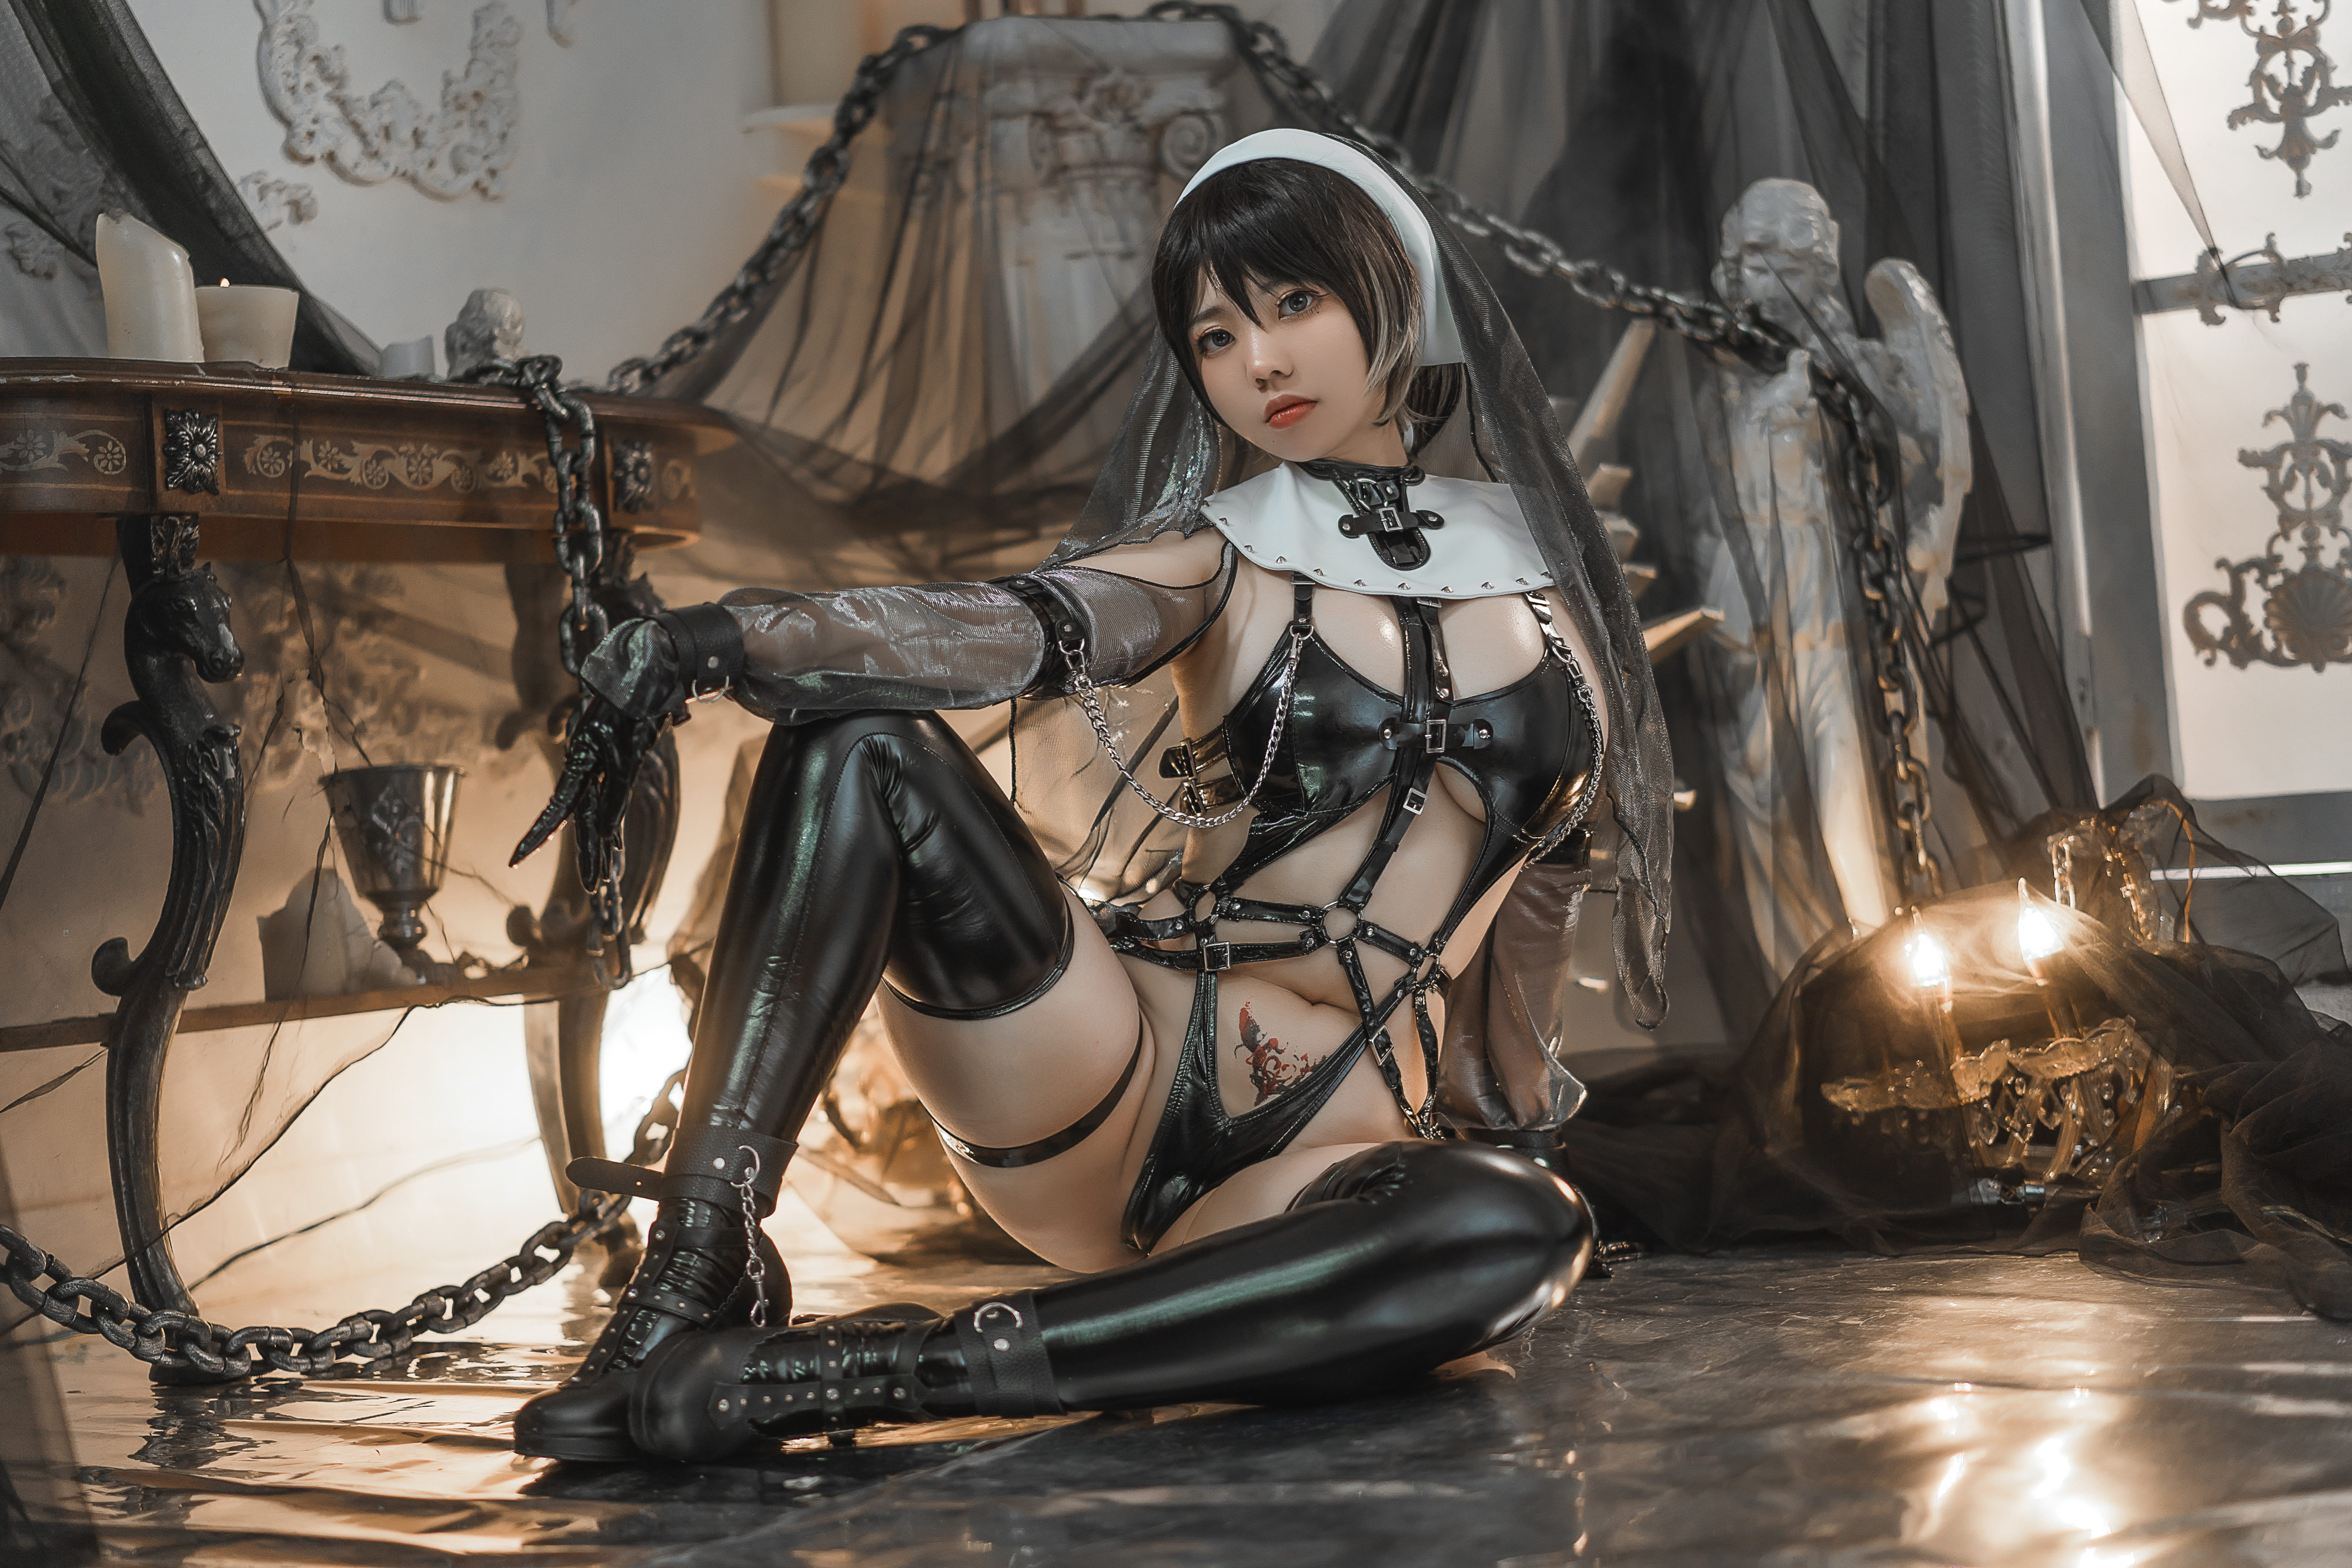 People 4000x2667 Asian cosplay nuns latex BDSM straps table ARiRi Ganlory indoors women indoors womb tattoo women model chains statue nun outfit